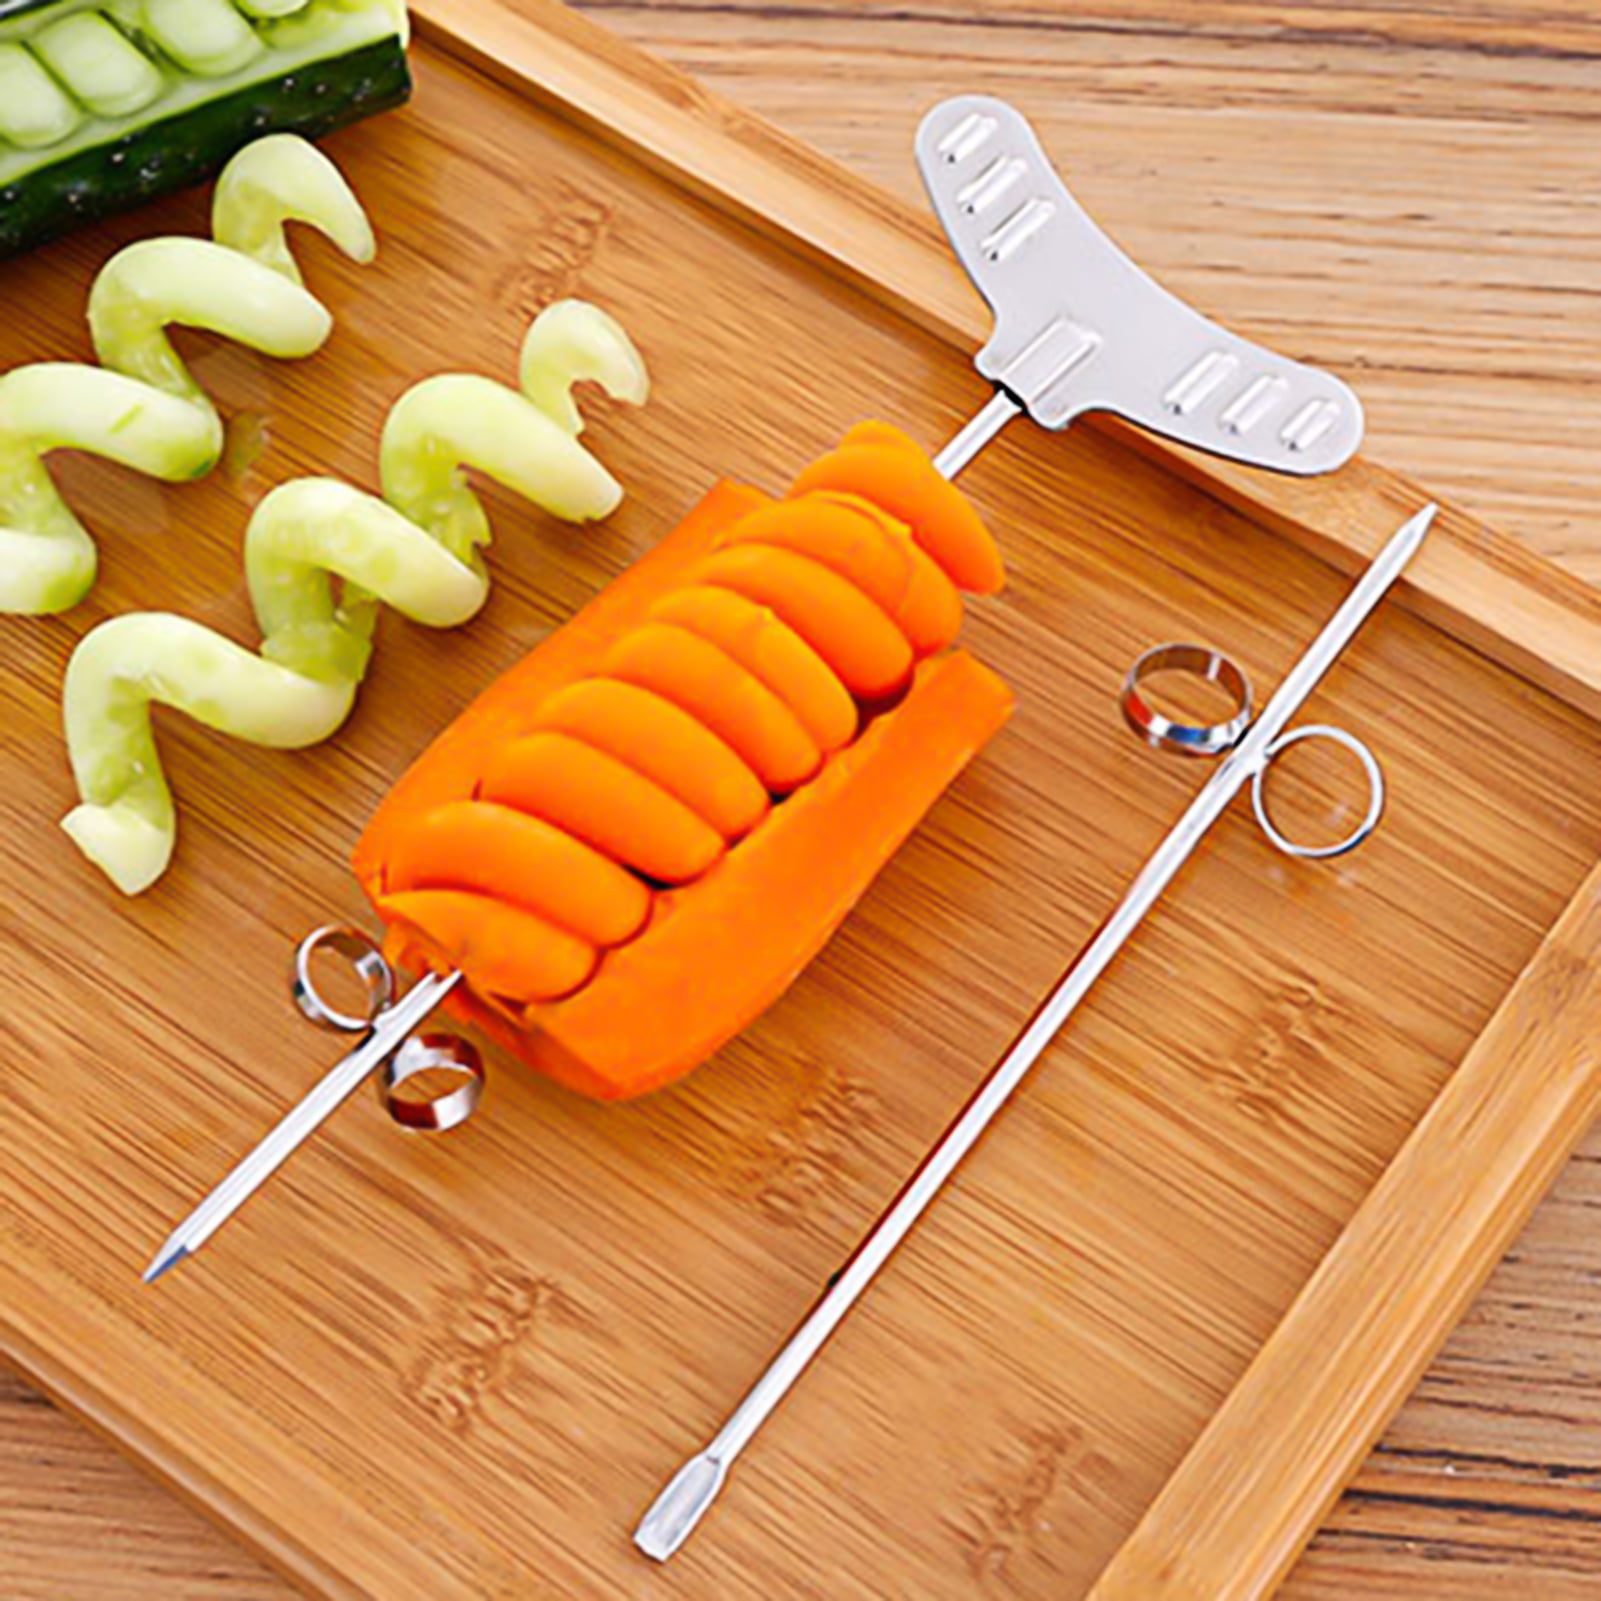 Tarmeek Spiral Potato slicer, Tornado Curly Fry Cutter with Stainless Steel  scewers, Manual Spiral Cucumbers Carrots DIY BBQ Slicer with Reusable  Stick,Kitchen Sli-cer,Kitchen Utensils 